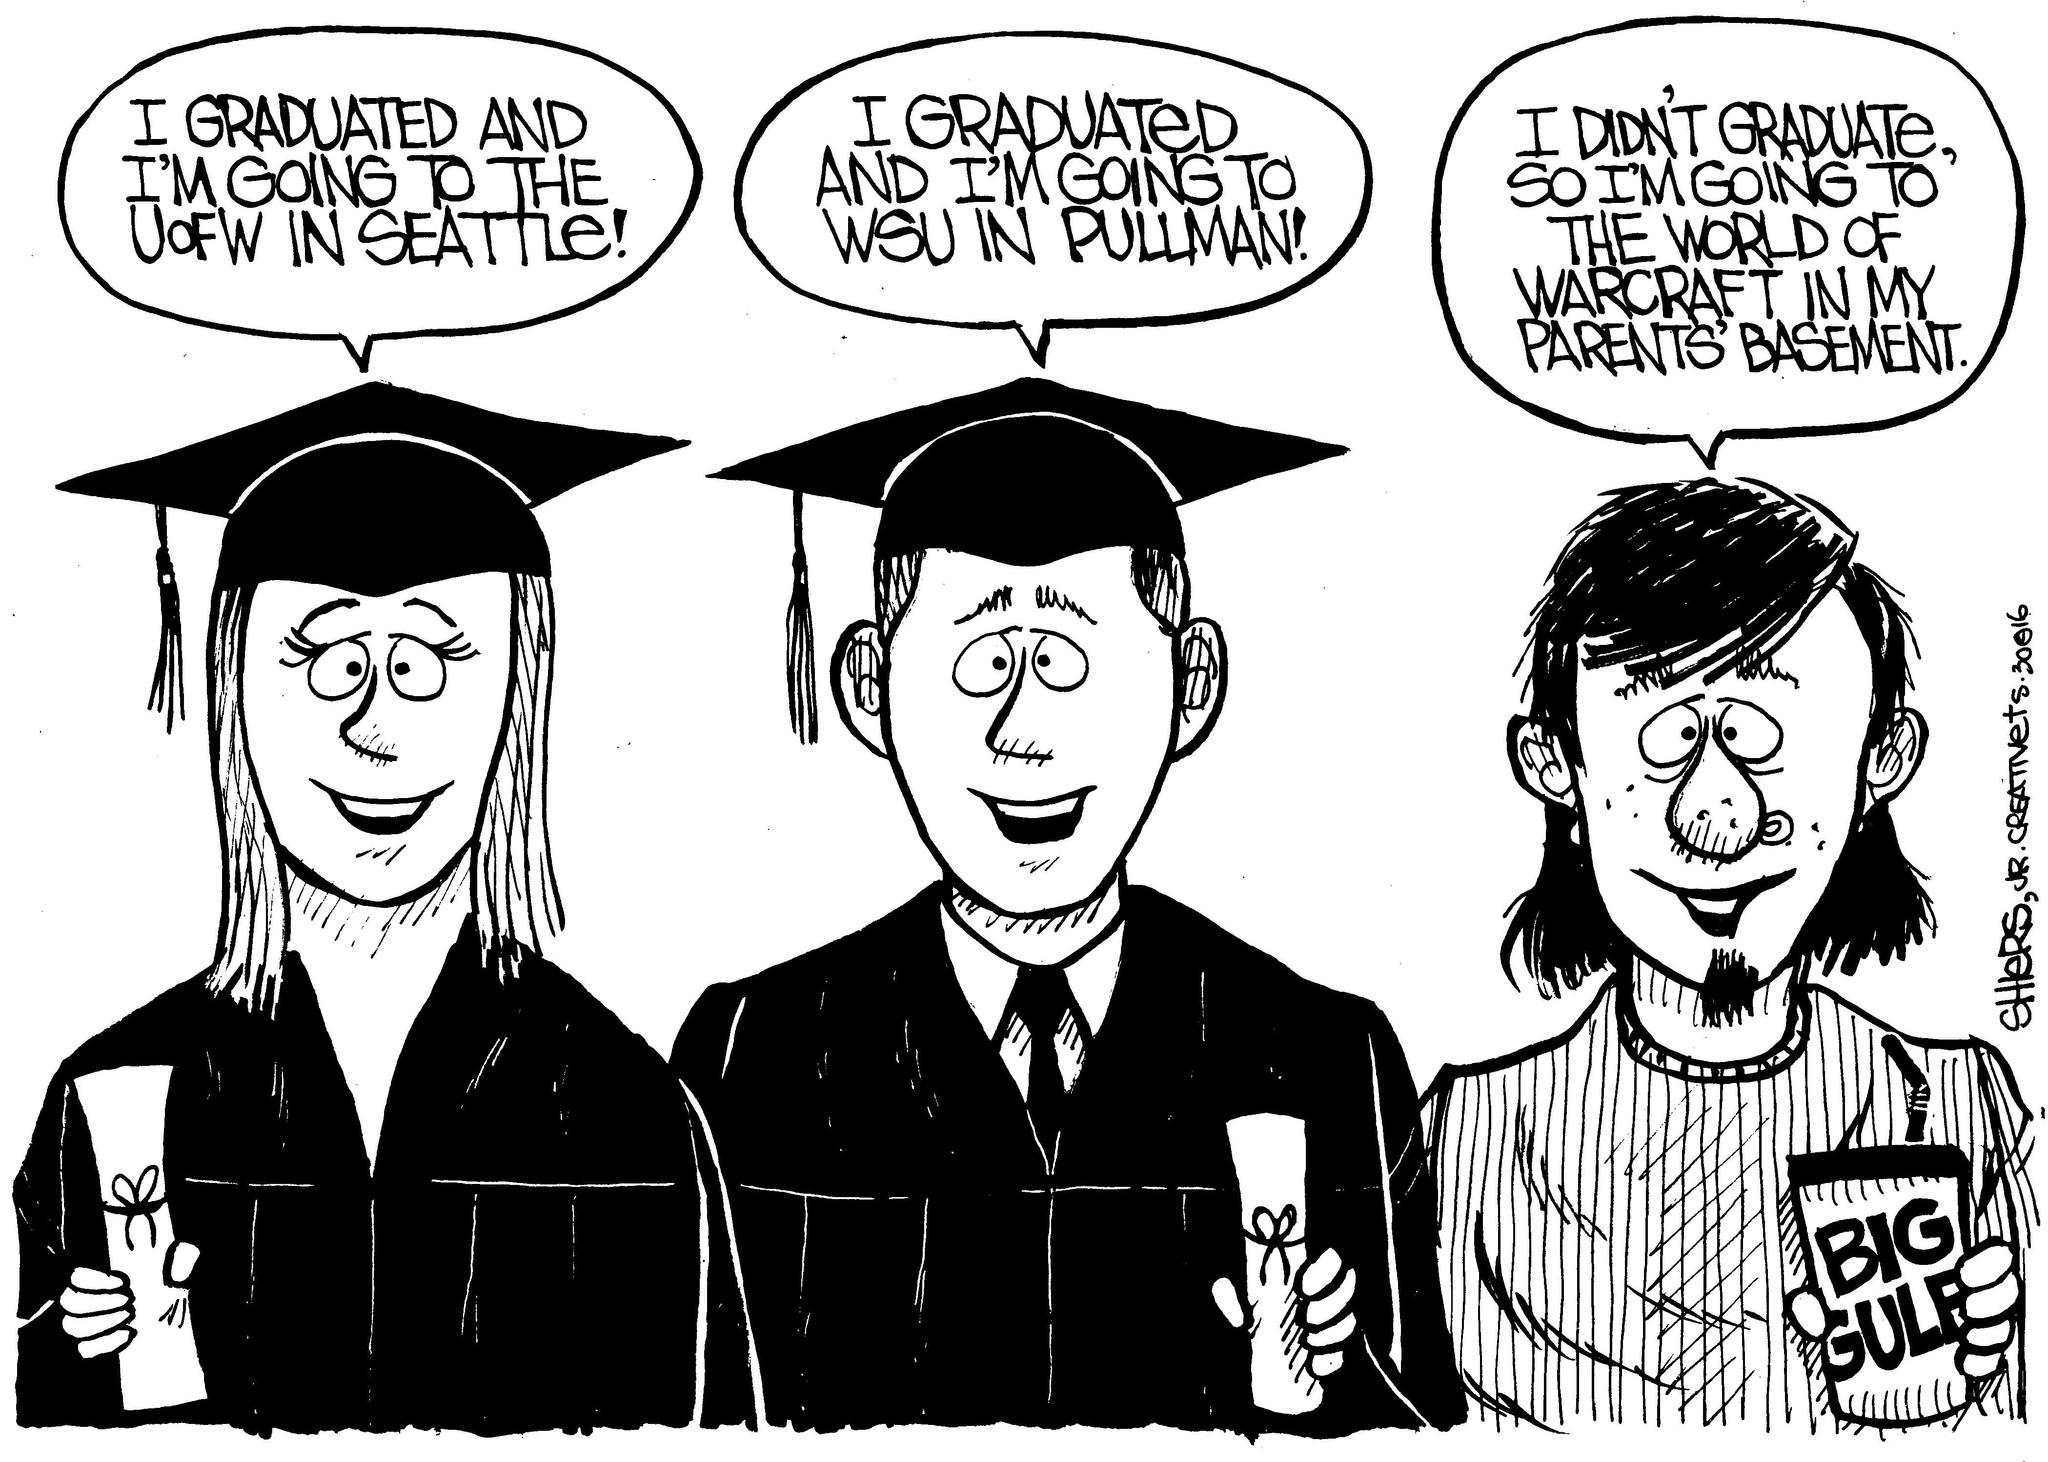 I graduated and I am going the University of Washington | Cartoon for May 31 - Frank Shiers